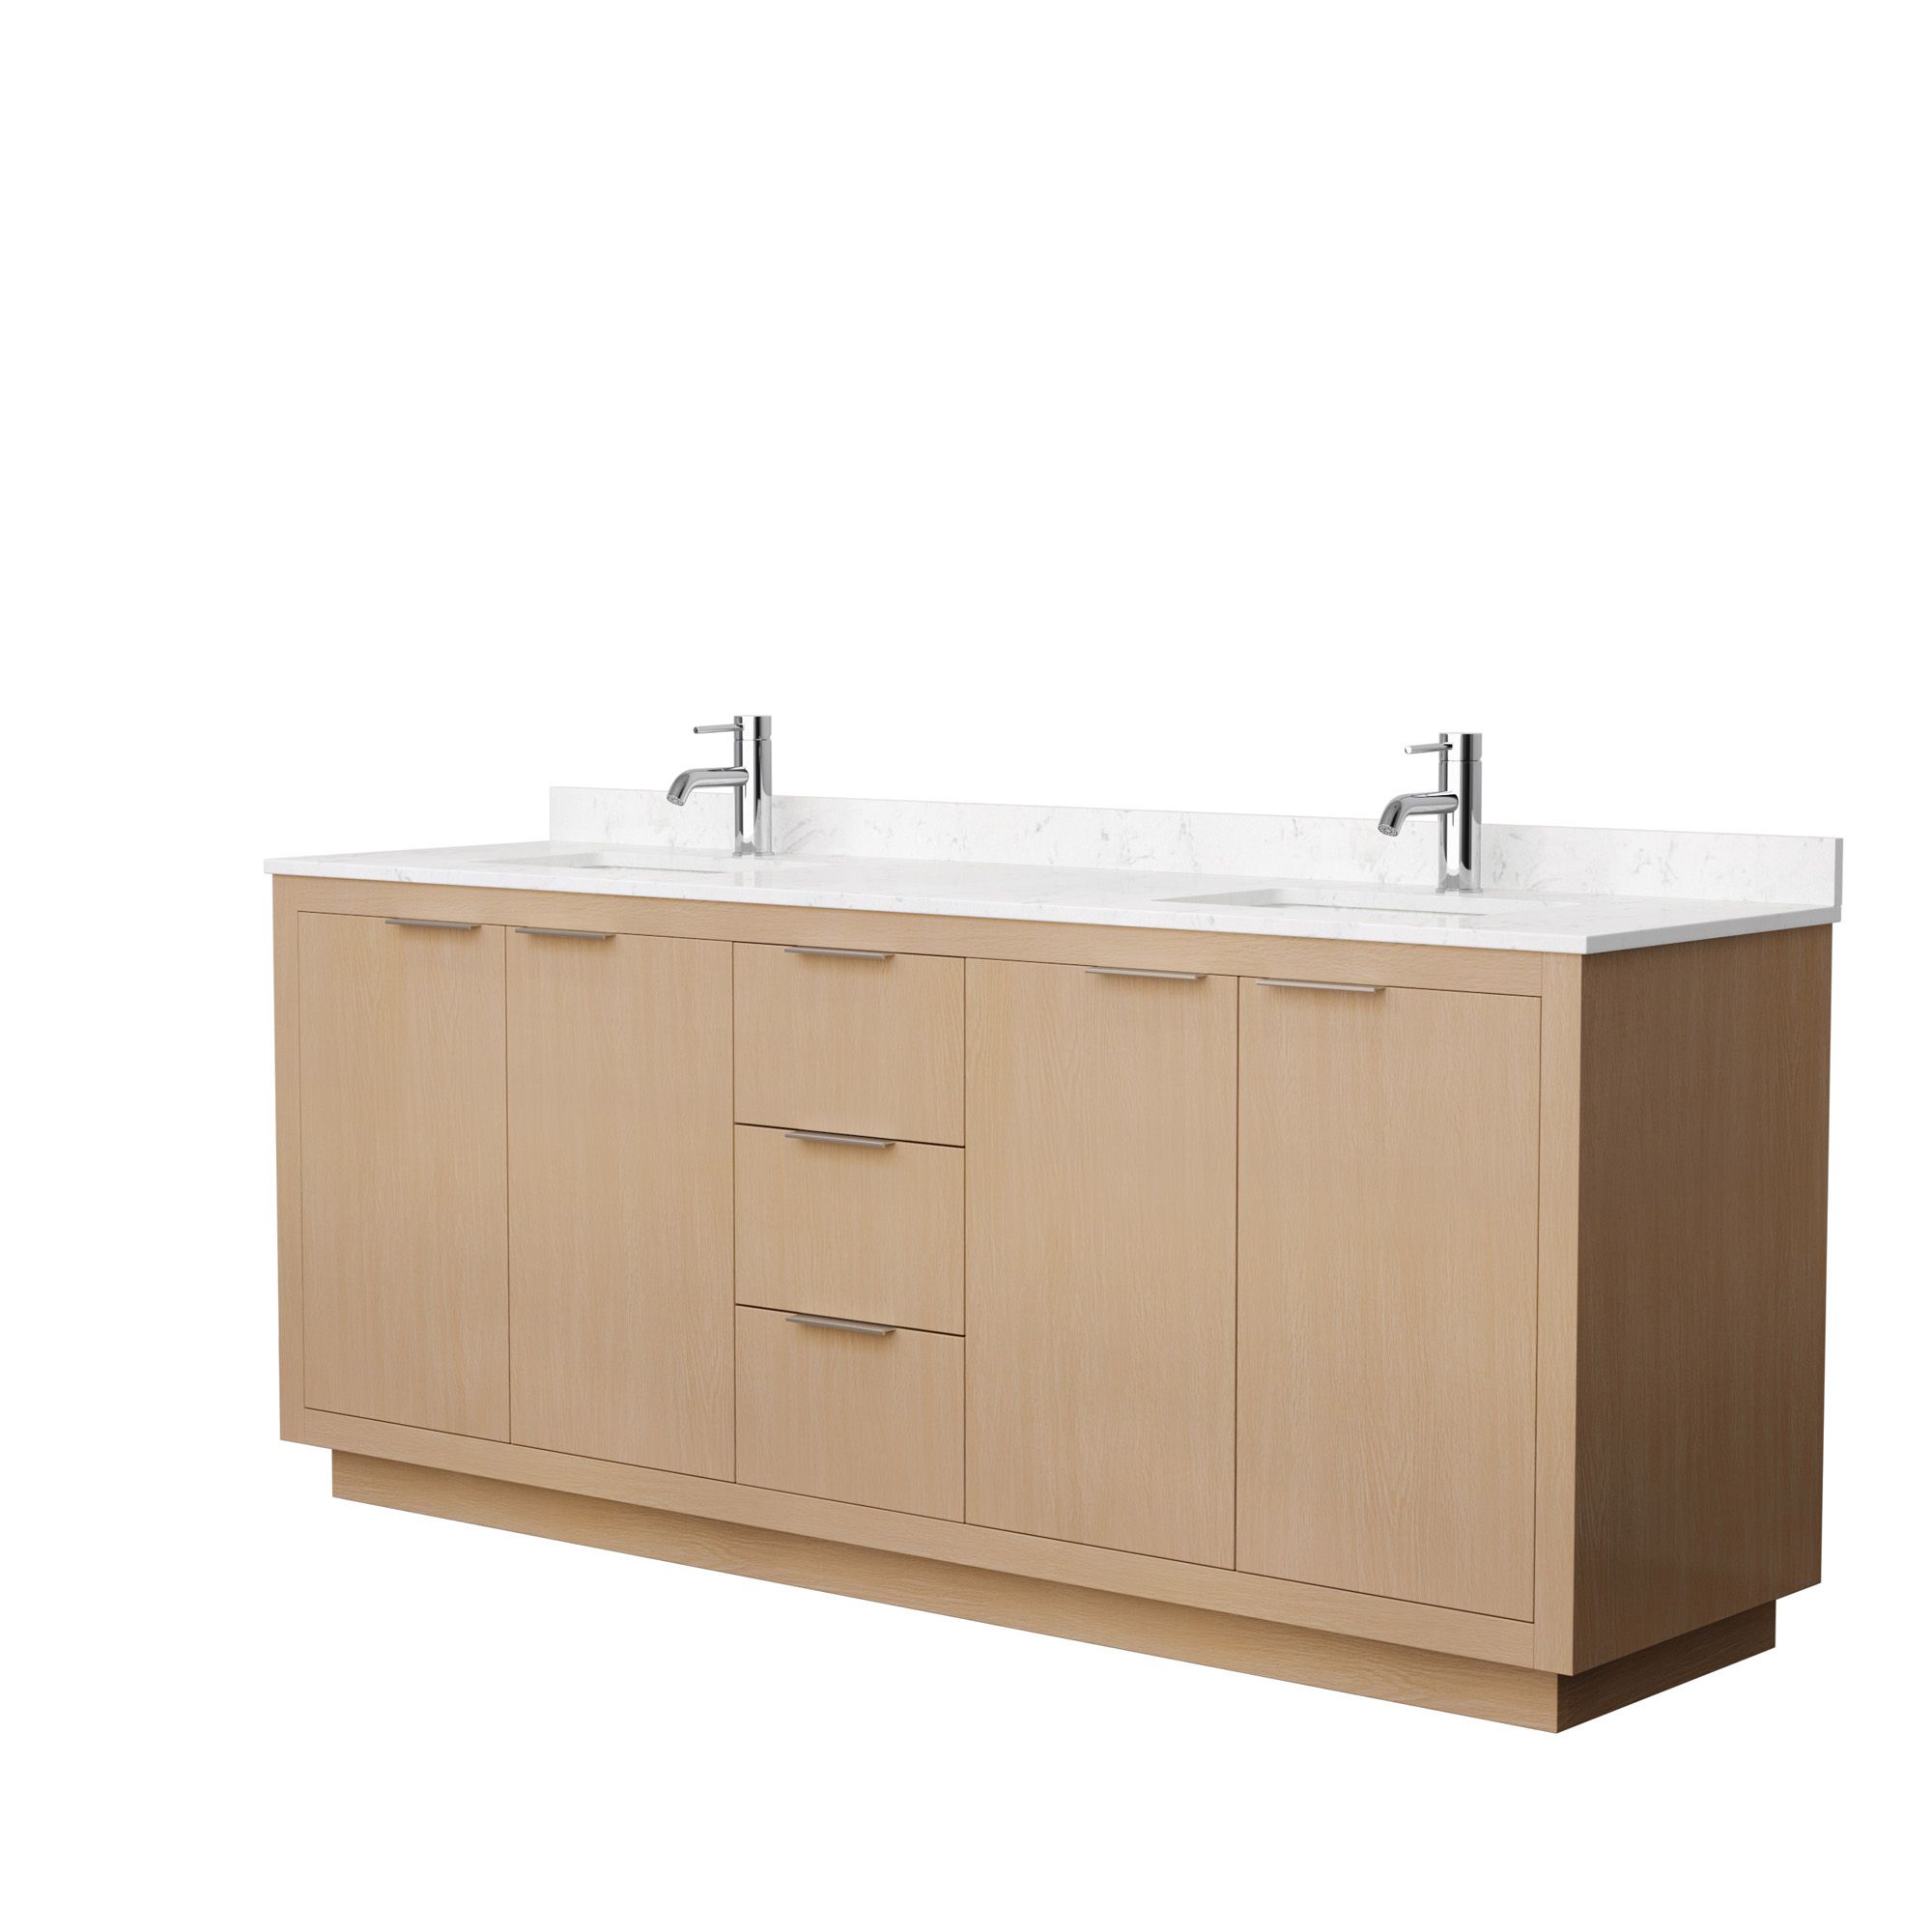 80" Double Bathroom Vanity in Light Straw with Countertop and Hardware Options